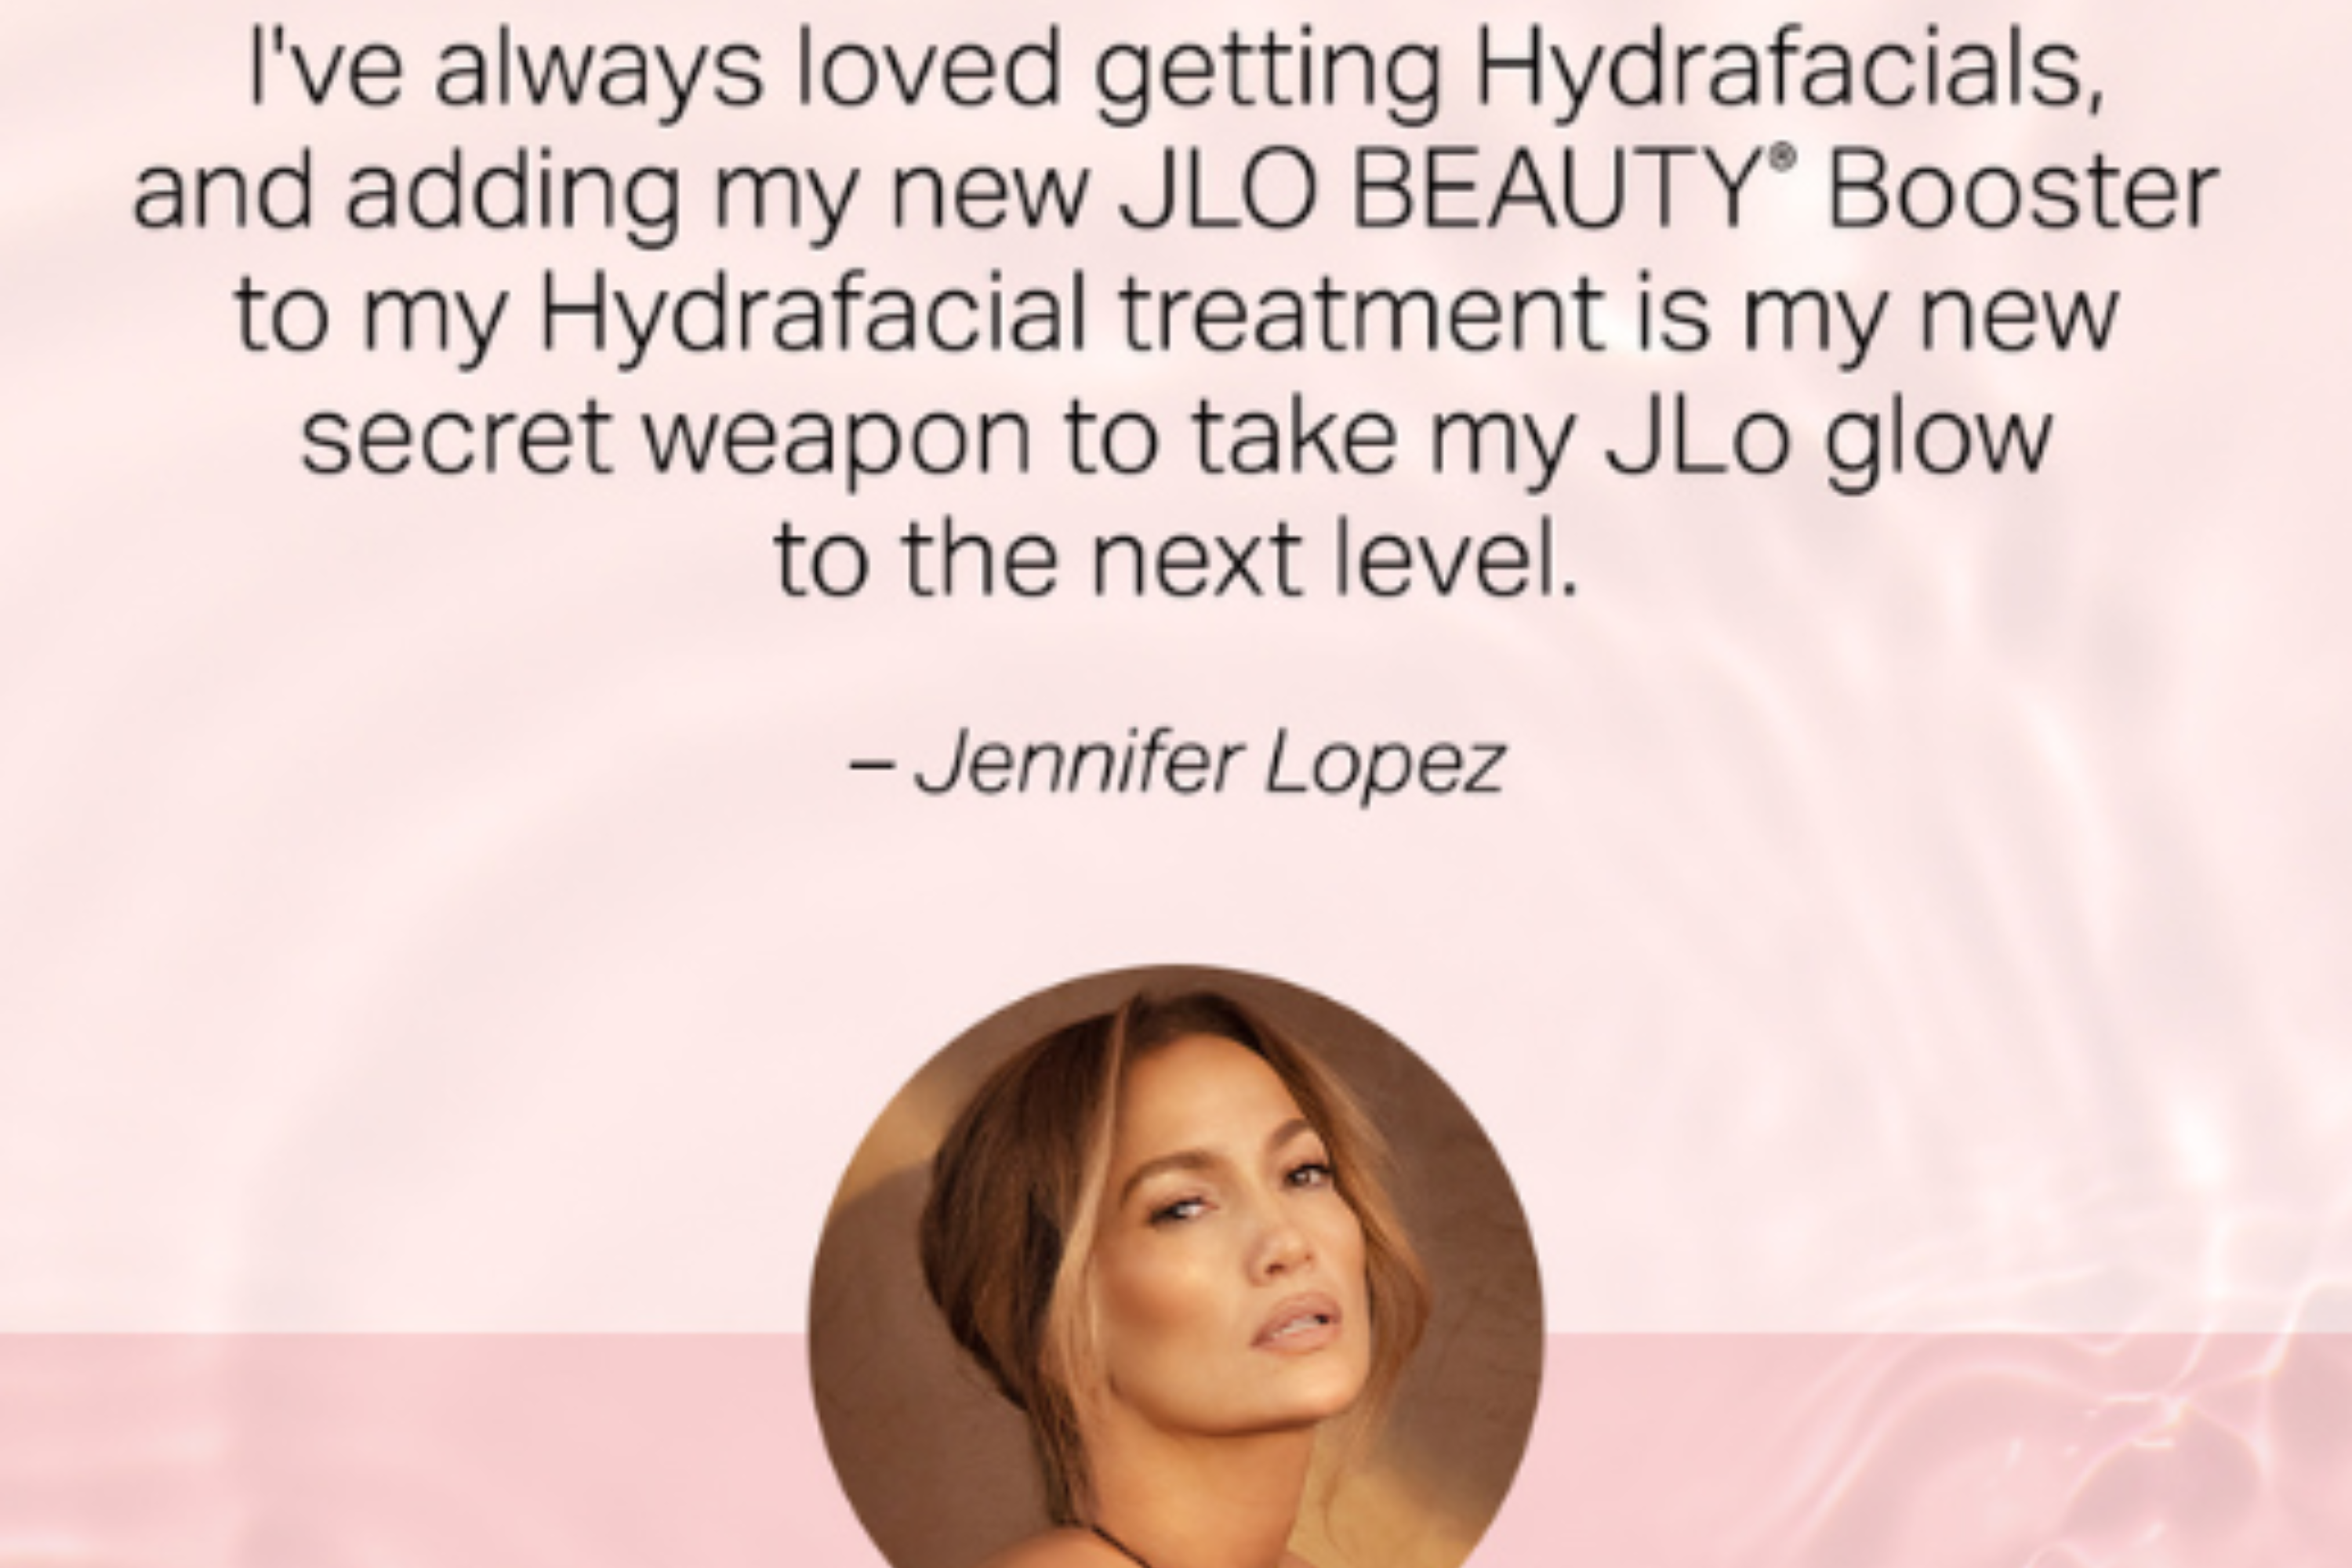 Load video: JLO Beauty Booster By HydraFacial